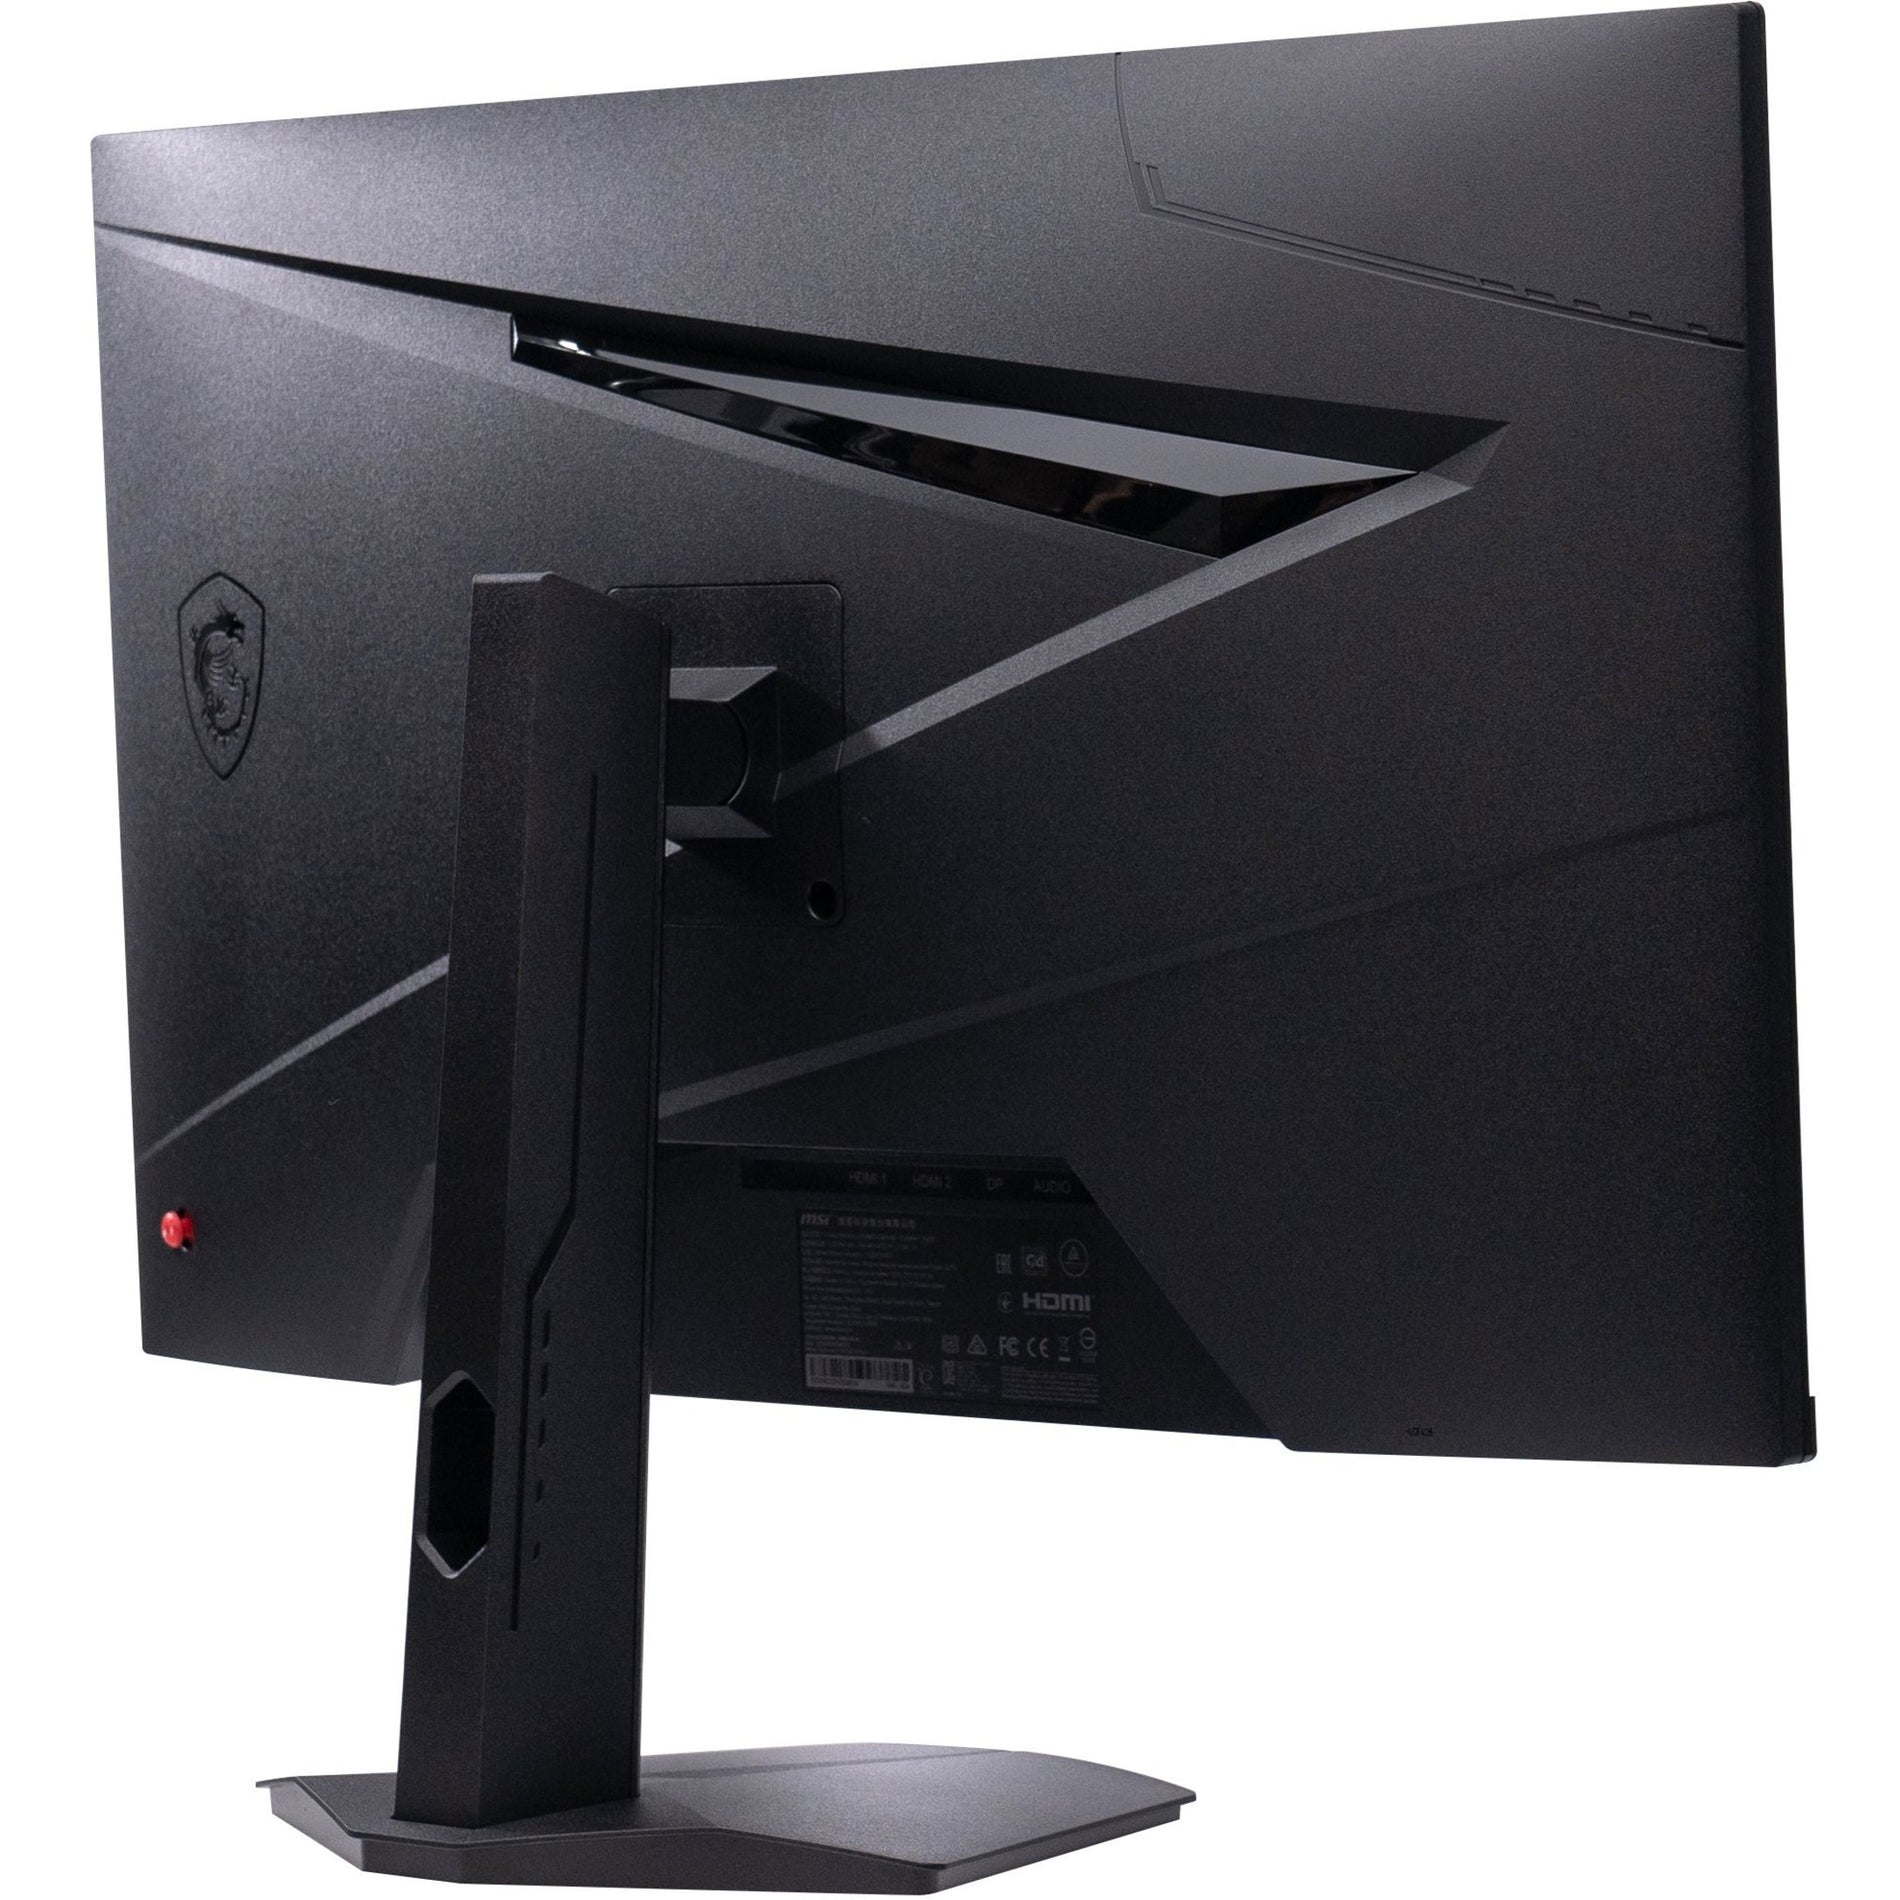 MSI OPTIXG274 Optix G274 27" Full HD Gaming LCD Monitor, 1ms Response Time, G-Sync Compatible, Wide Color Gamut